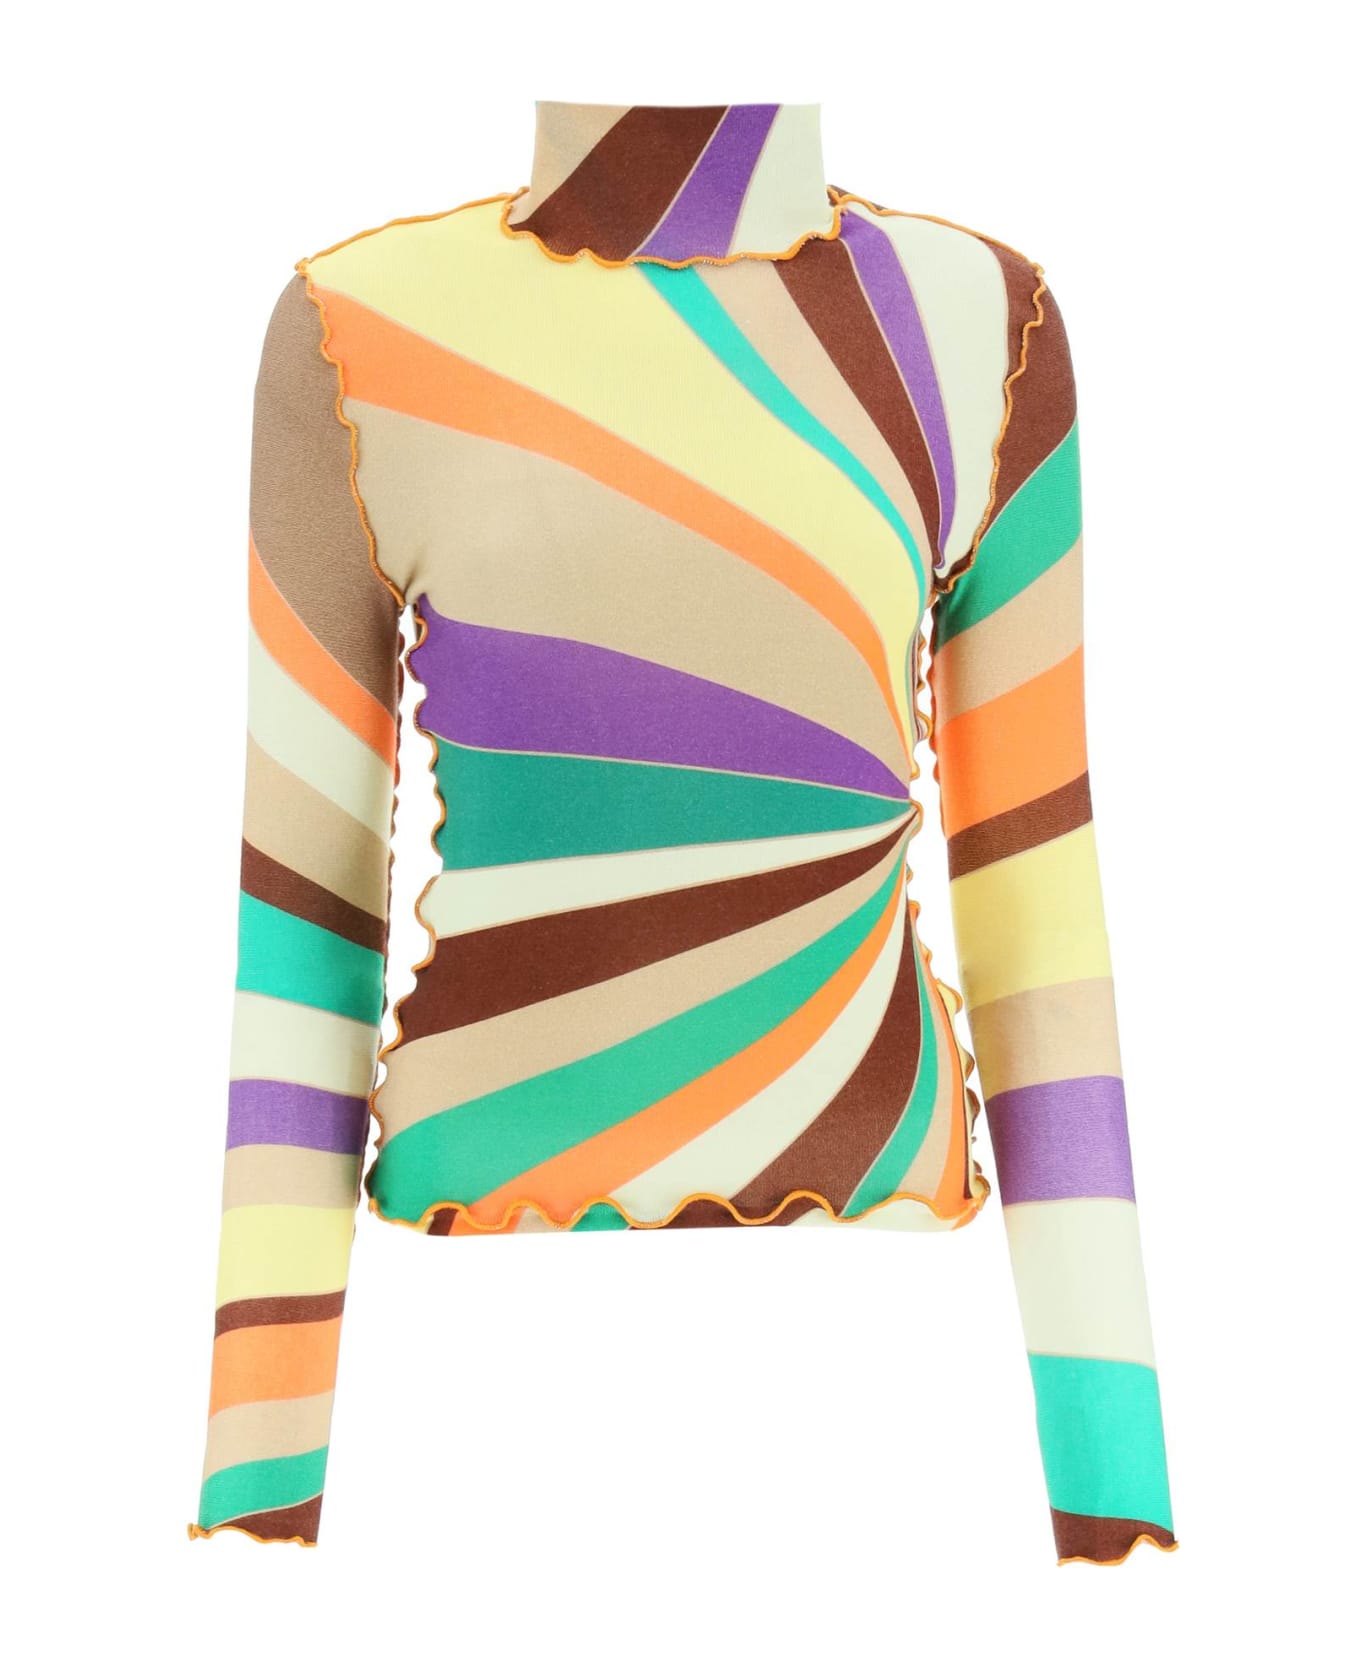 SIEDRES Multicolored Turtleneck Sweater With Gathered Stitching - MULTI